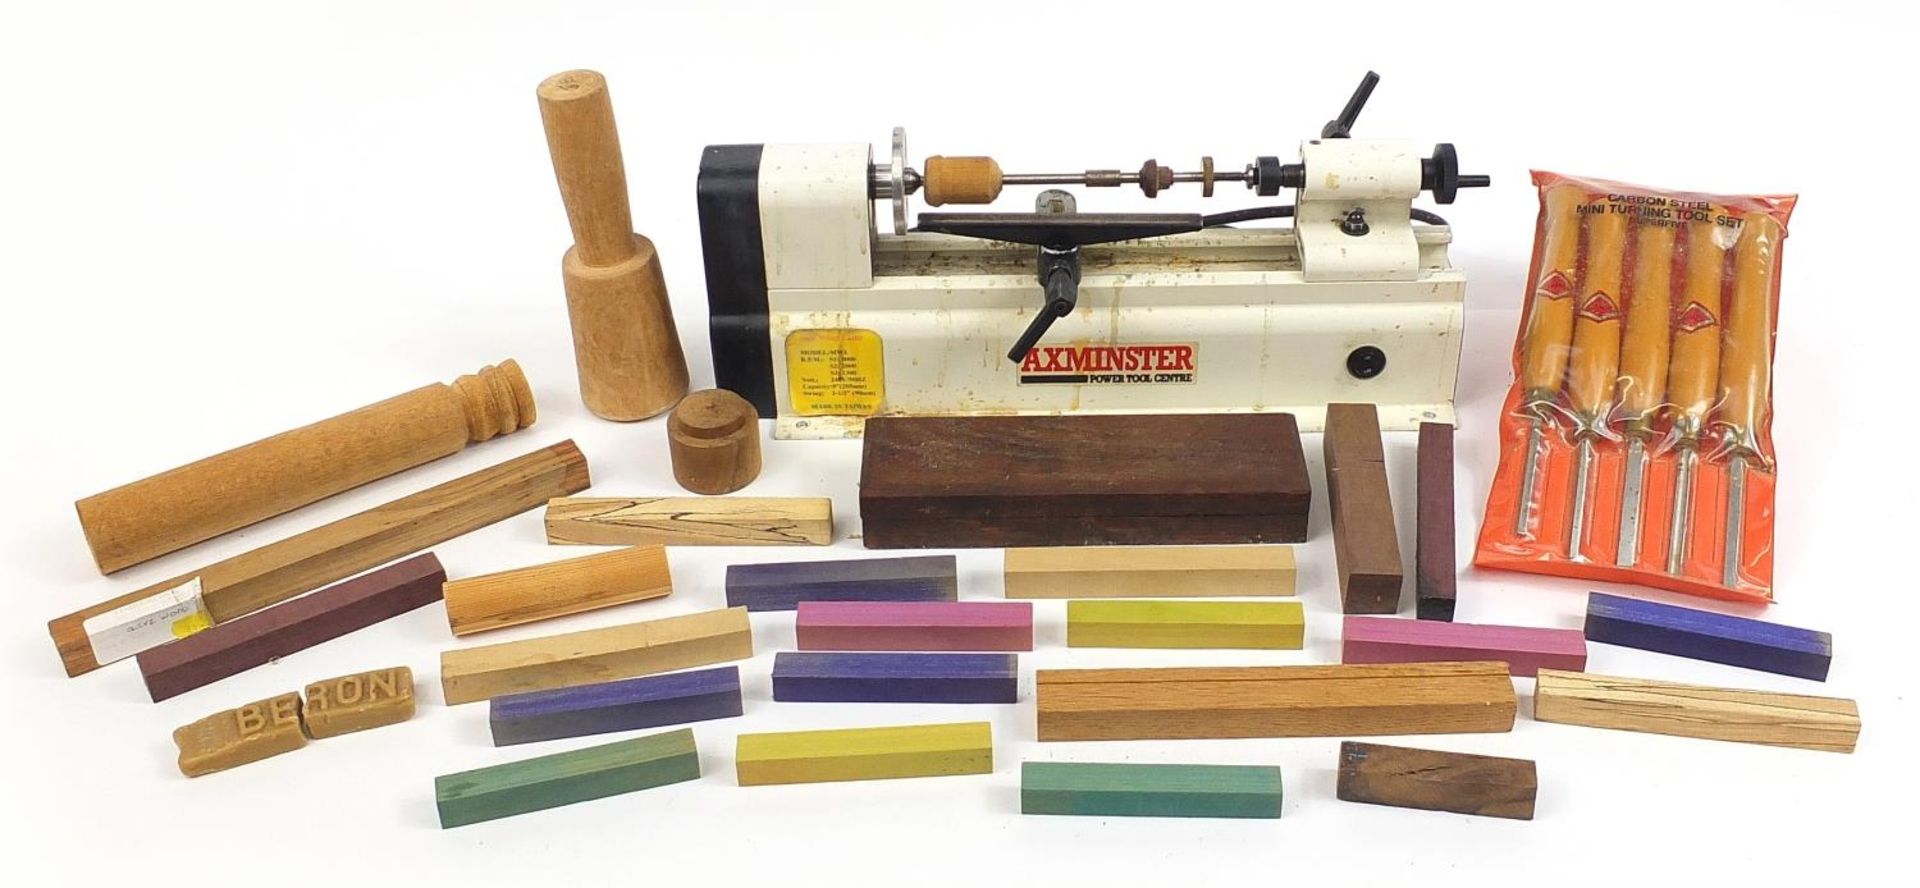 Axminster woodworking lathe, five Henry Taylor chisels and accessories